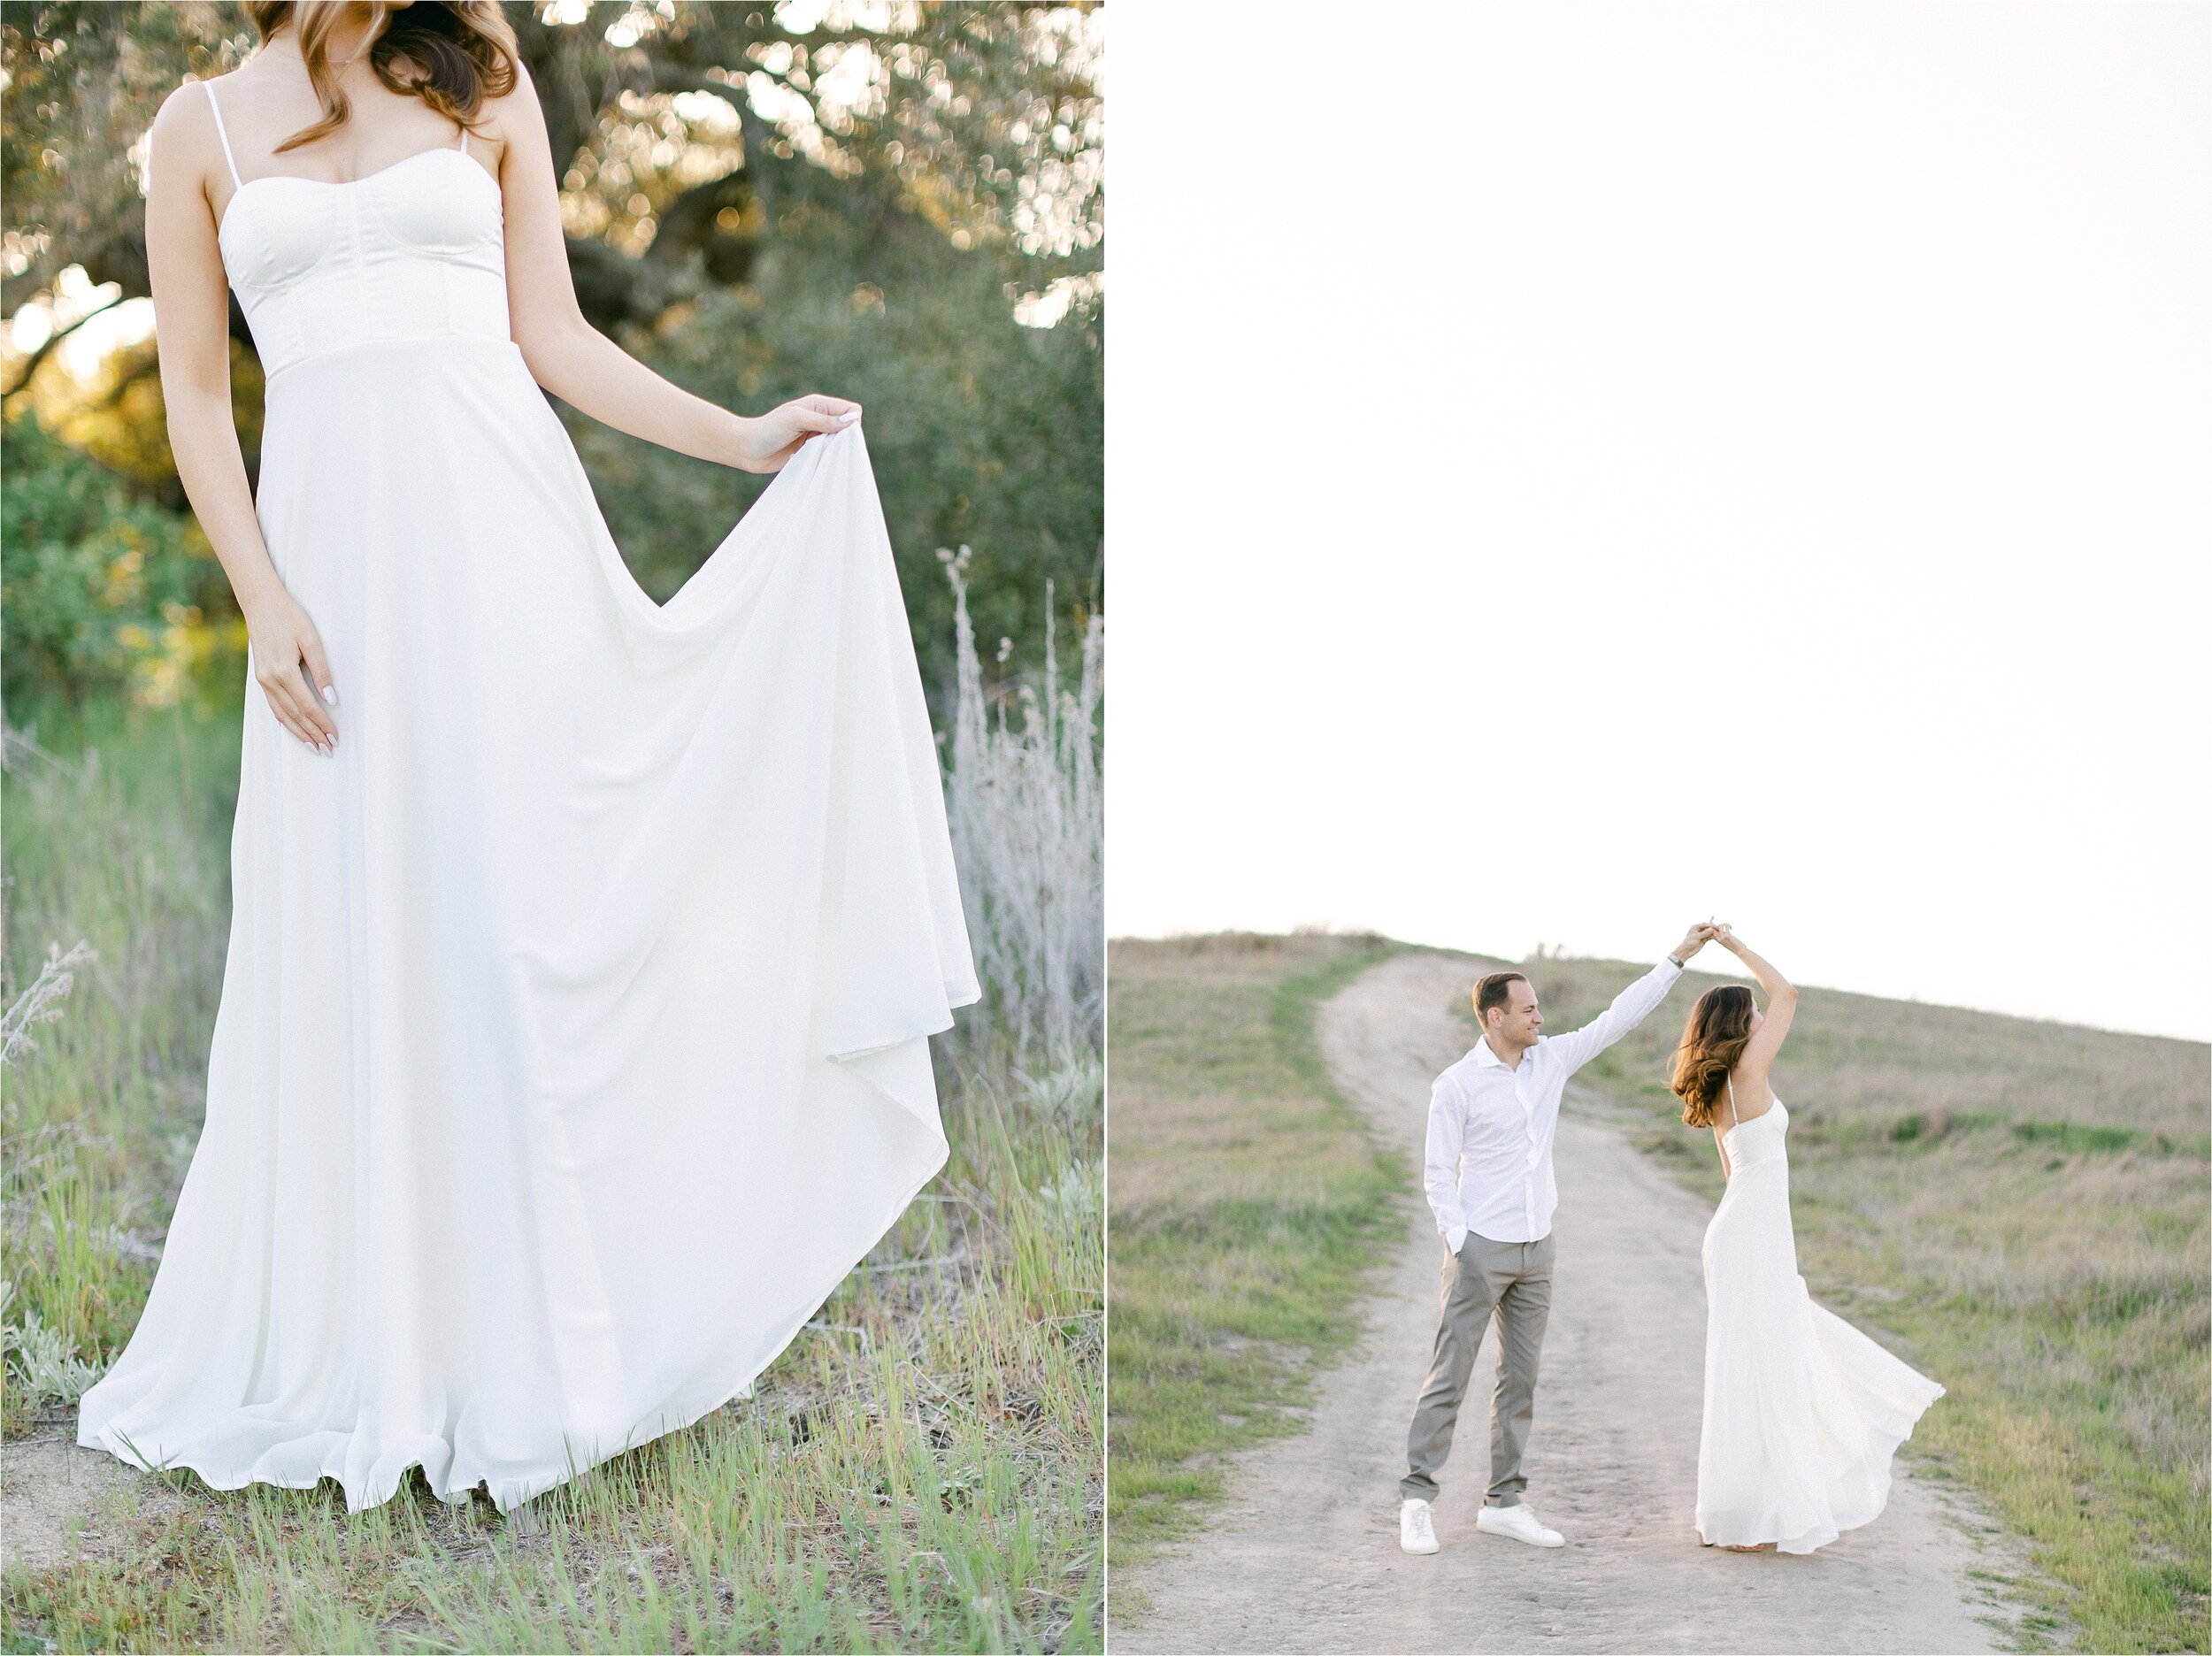 Fiance twirls while taking their engagement photos in Orange County, CA.  Her white chiffon gown delicately floats with her movement.